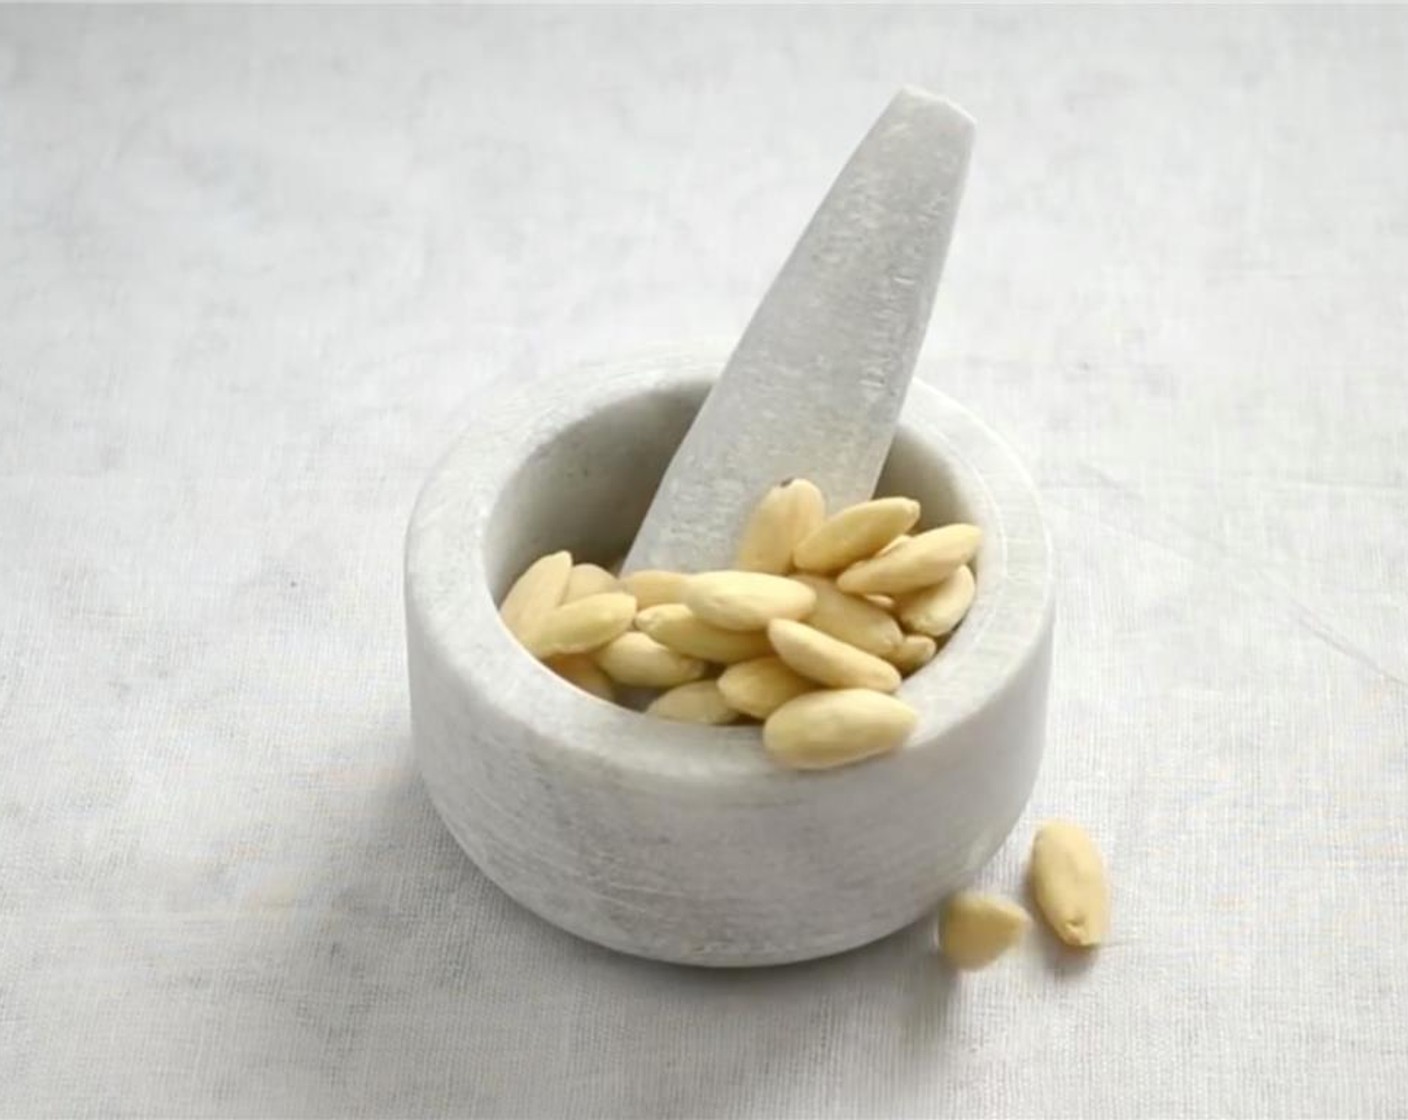 step 2 Peel and grind the cooked almonds in a food processor or mortar until the granules are 2-3 millimeters in diameter.